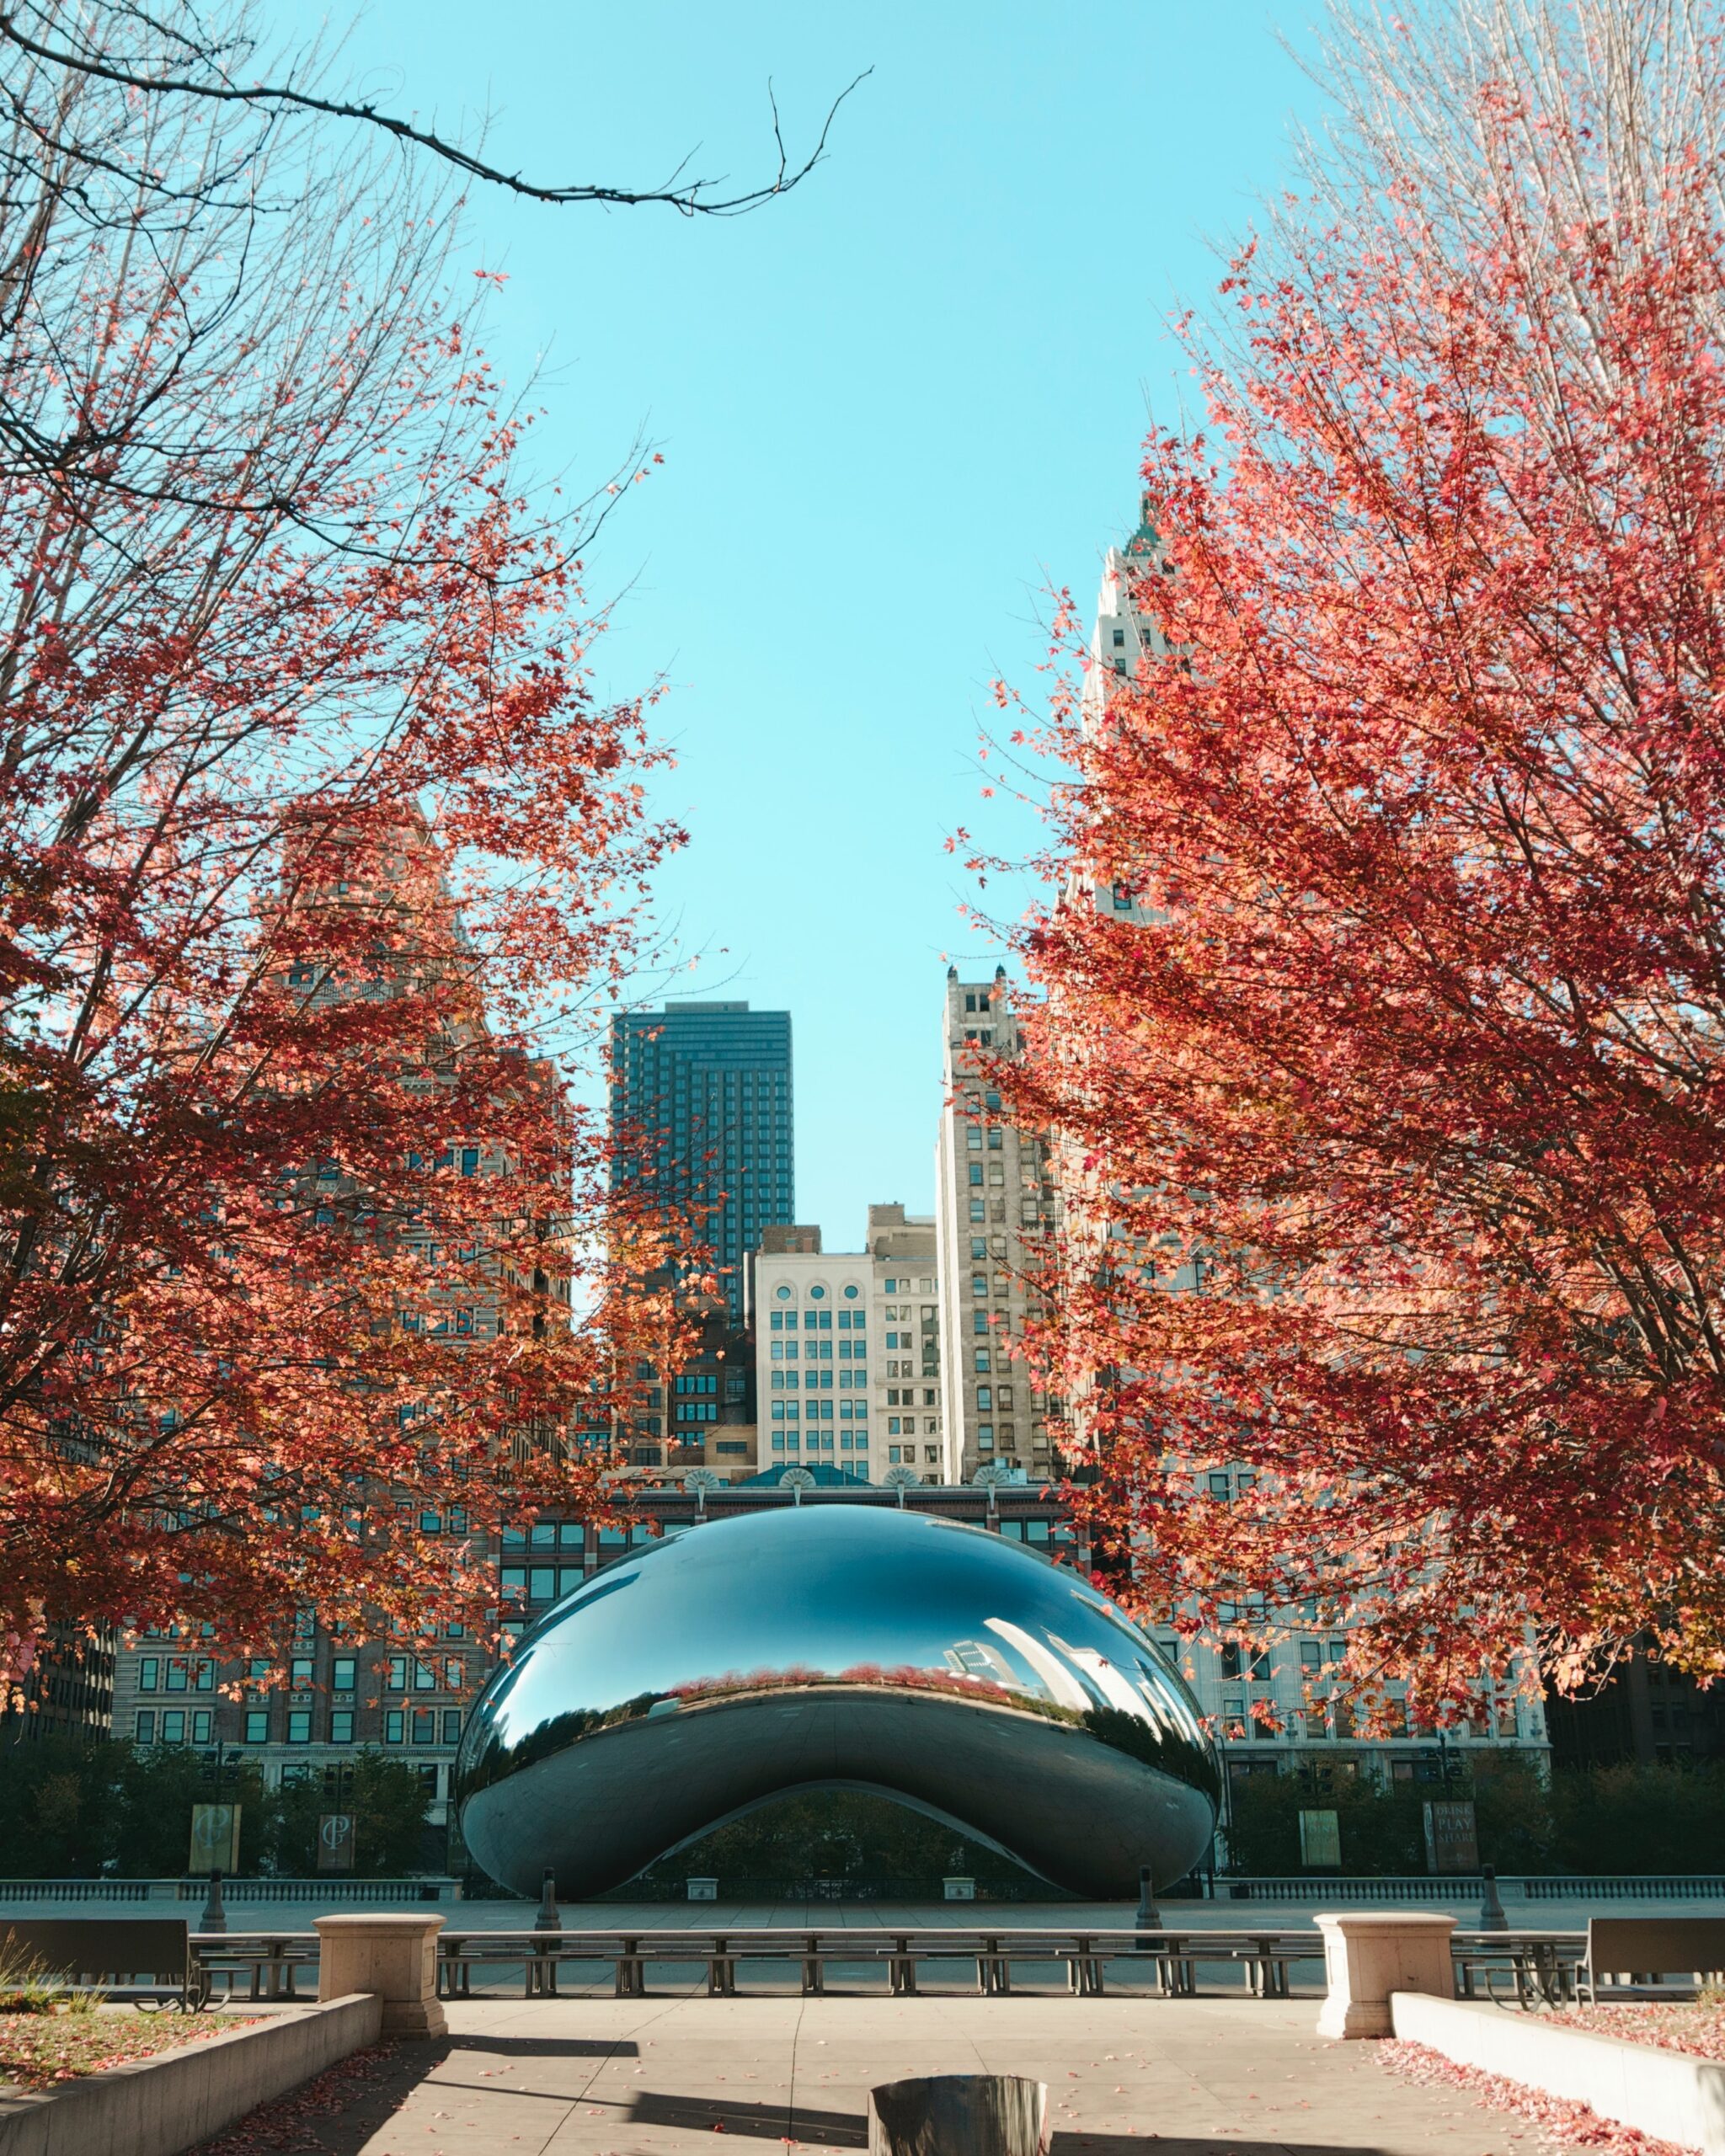 A distant image of the Bean in Chicago